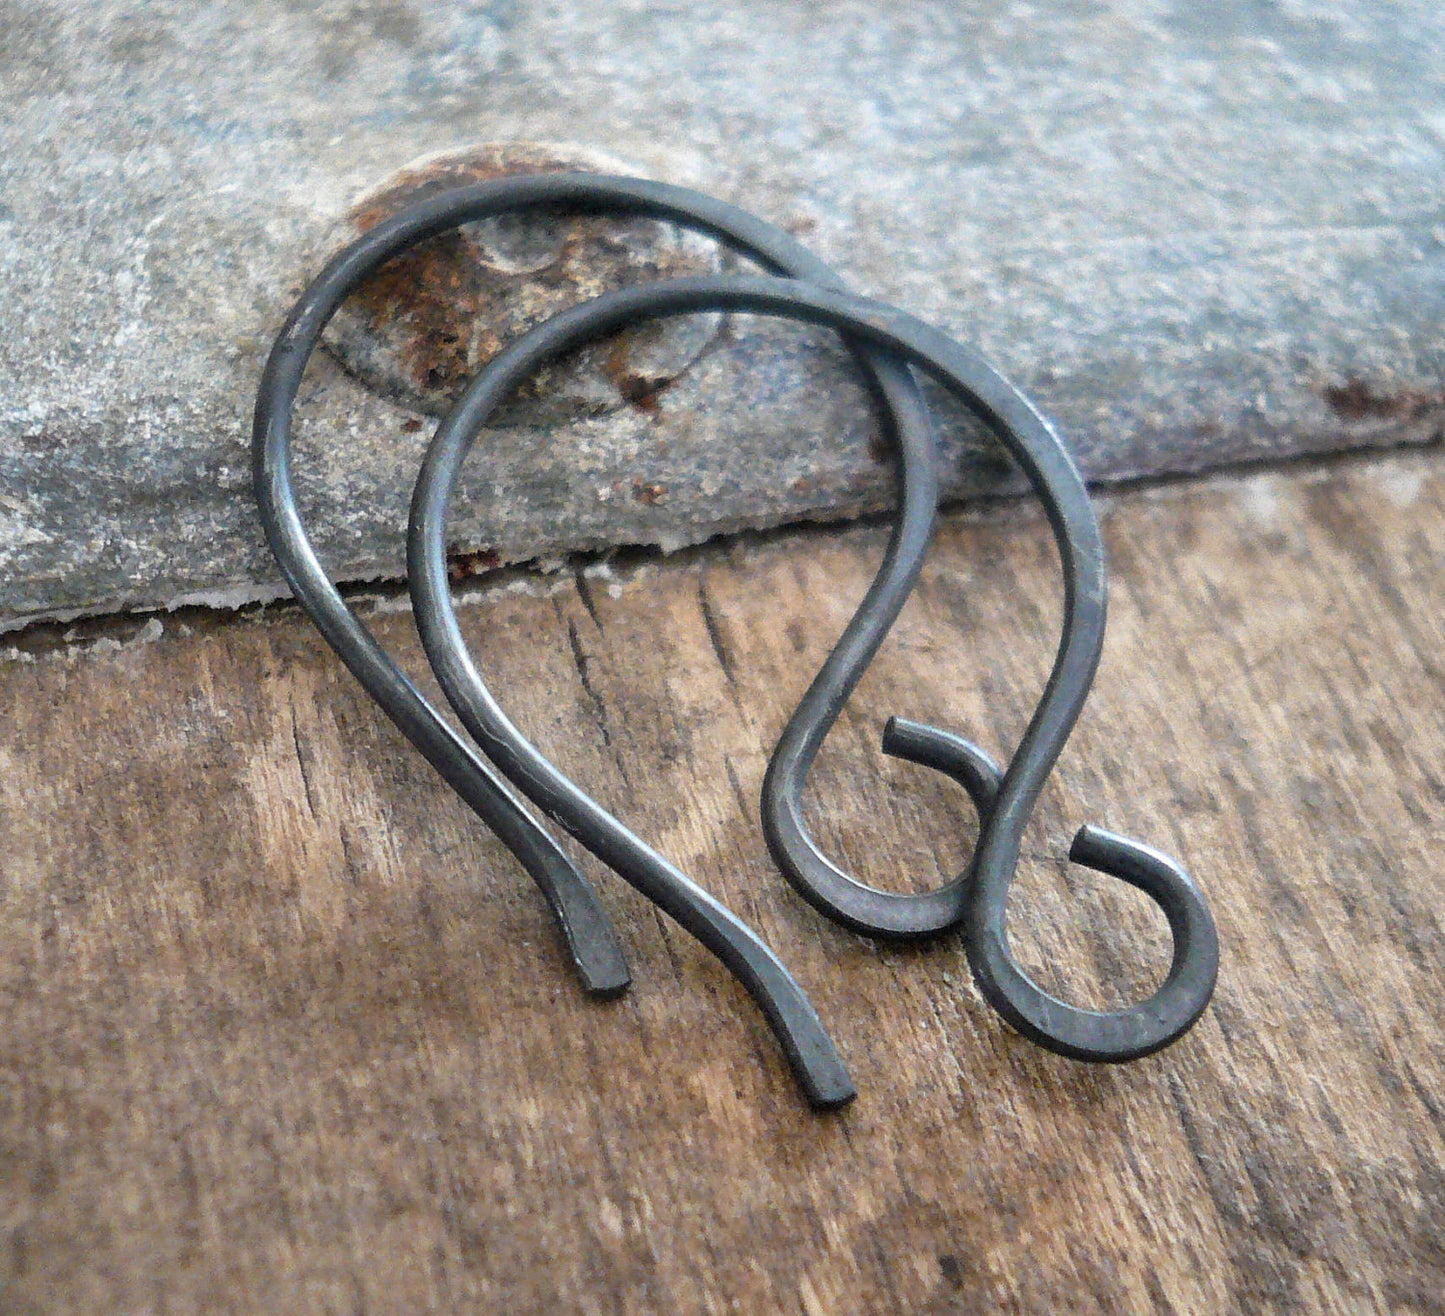 12 Pairs of my Large Twinkle Sterling Silver Earwires - Handmade. Handforged. Heavily Oxidized